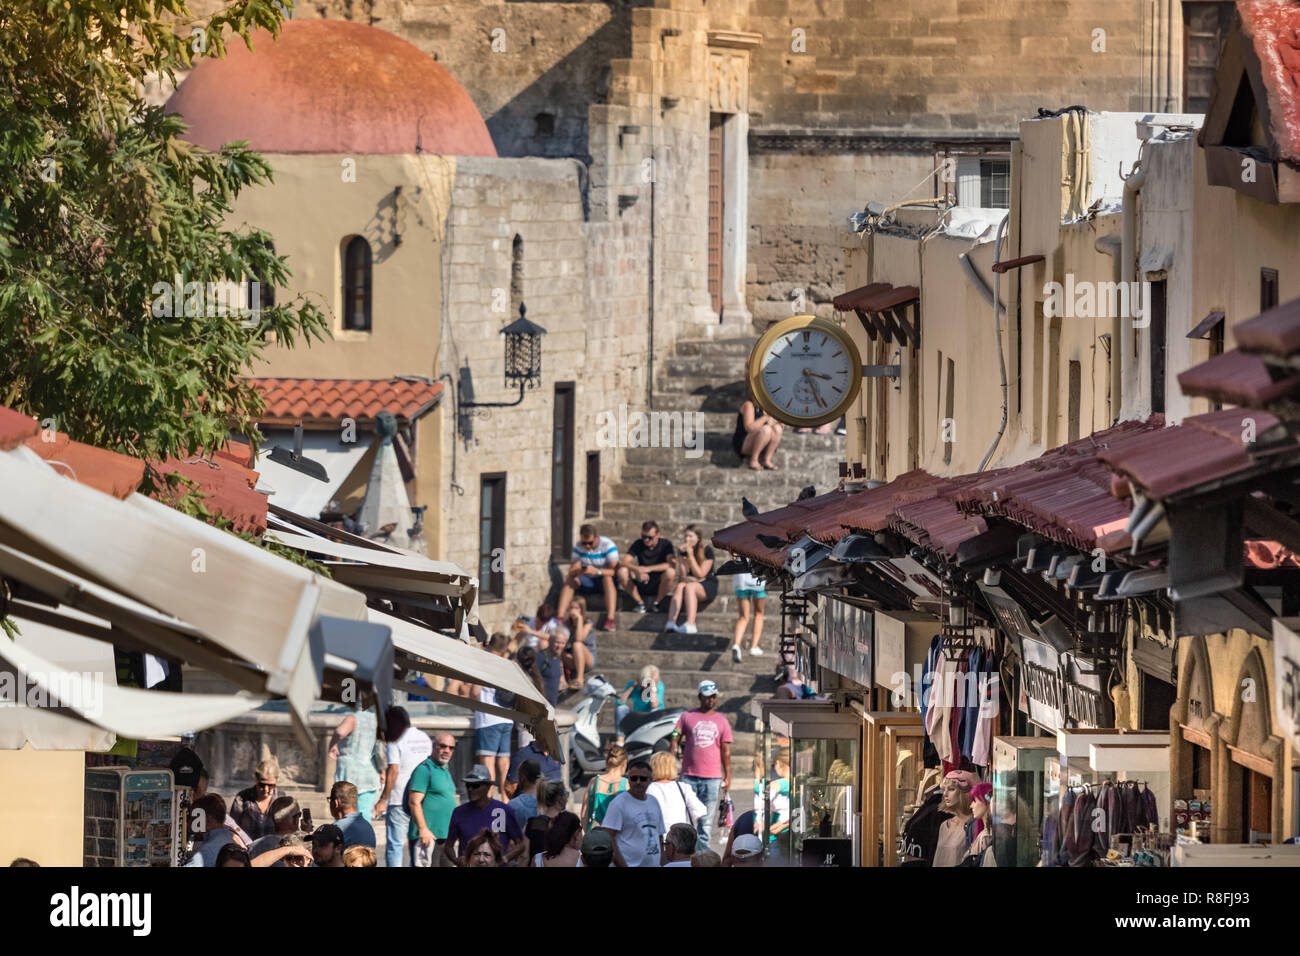 Rhodes, Greece - October 10th, 2018: View of a main commercial steet and souvenirs market inside the old town of Rhodes, Greece. Stock Photo